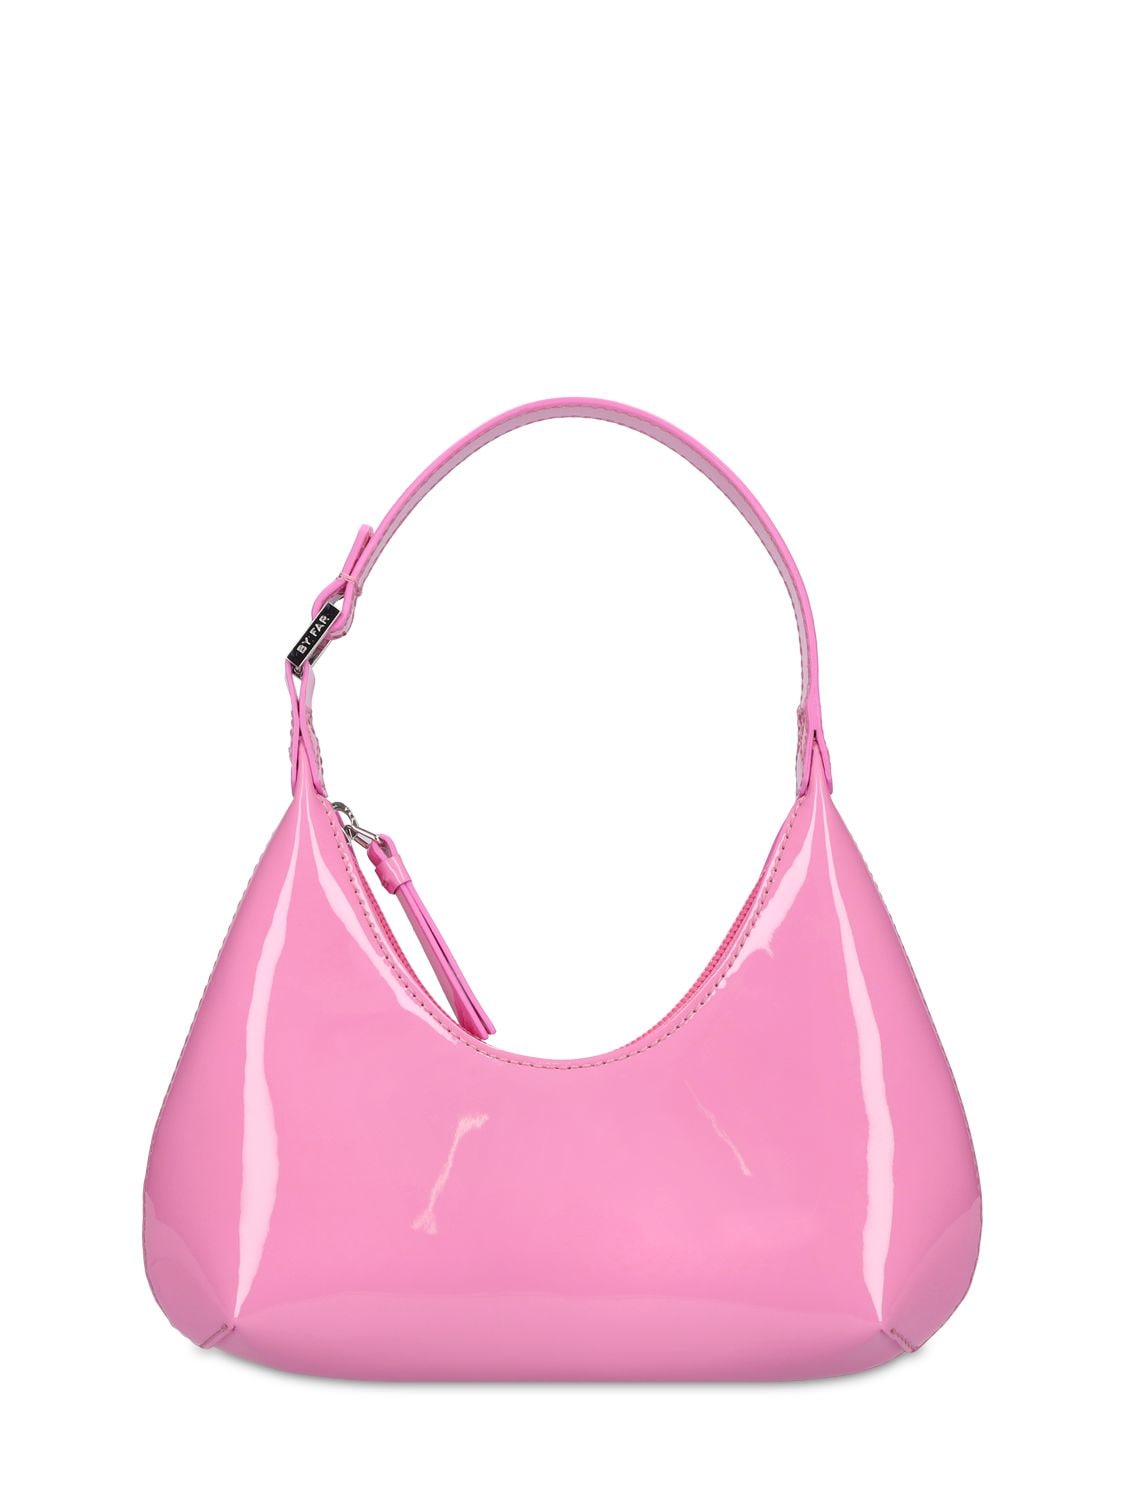 Baby Amber Patent Leather Bag